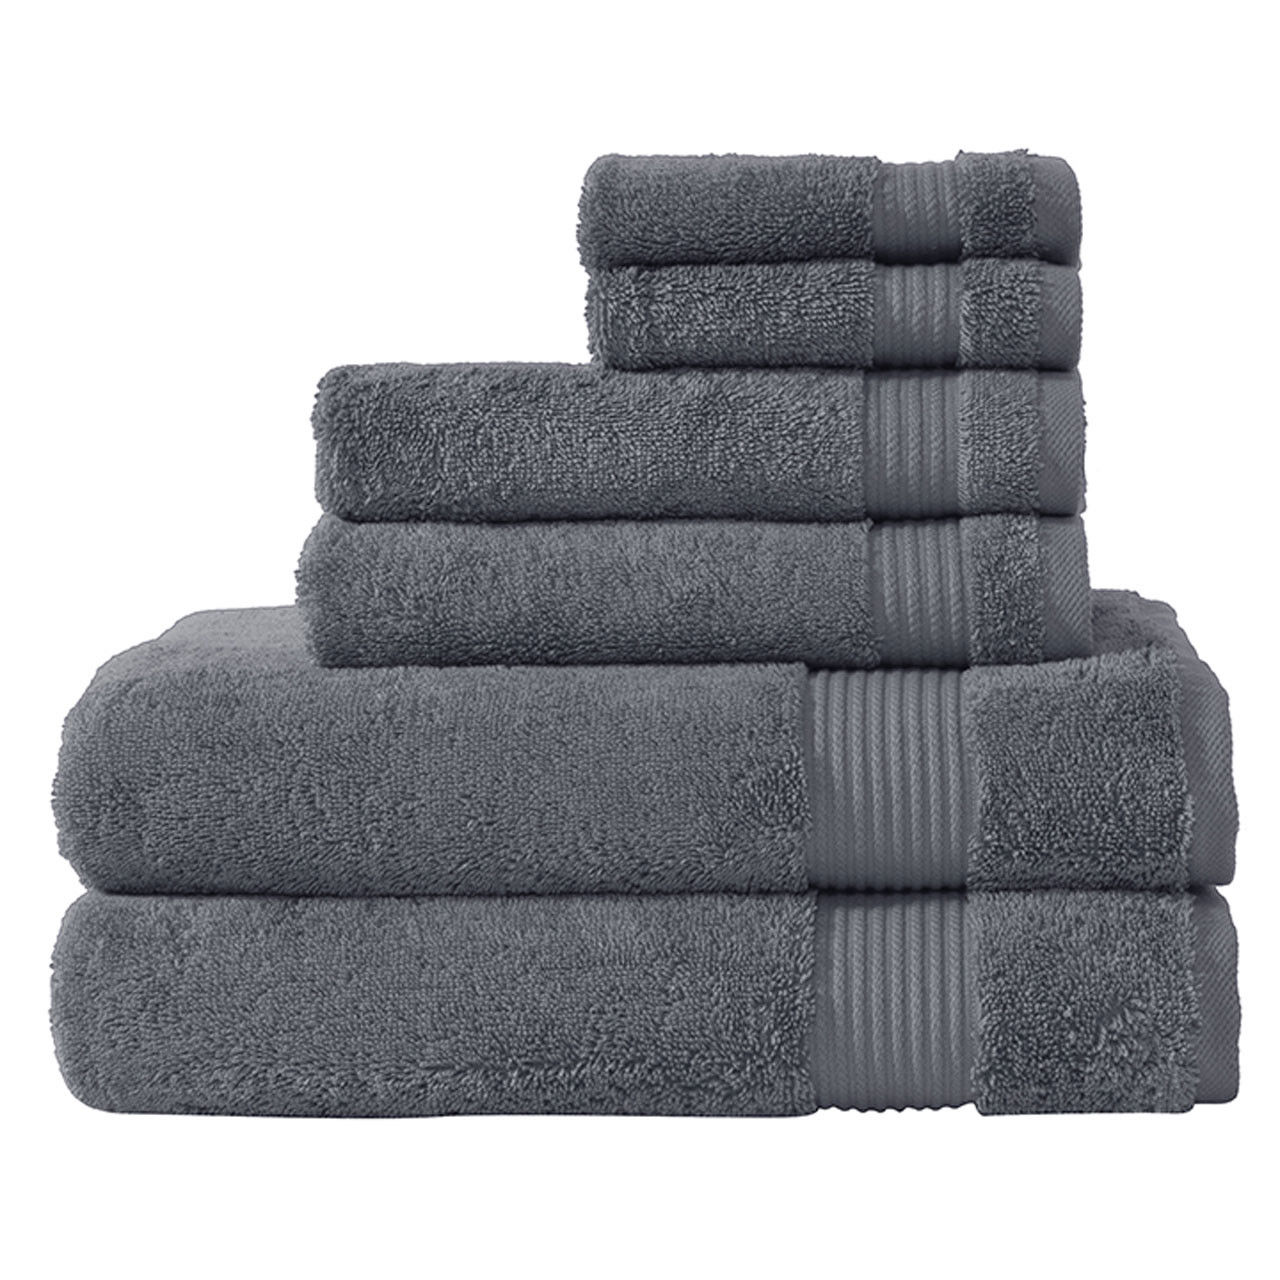 Can you specify the material and color of these gray towels in the Amadeus Turkish Collection?